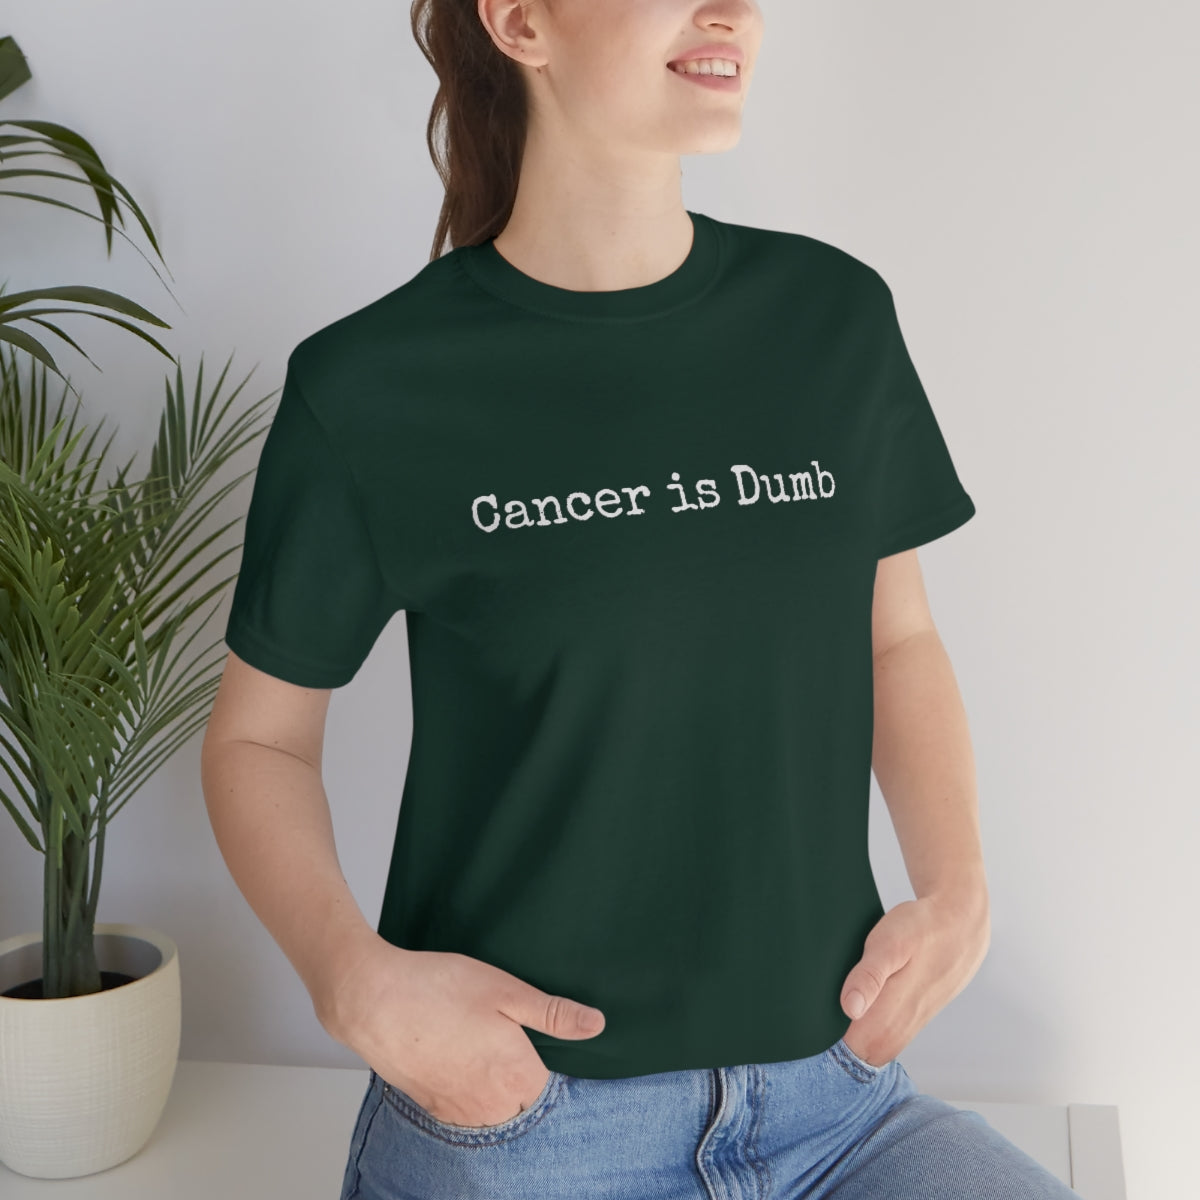 Unisex Jersey Short Sleeve Tee T Shirt tshirt Mens Womens Apparel Clothing Anti Cancer Cancer is Dumb Survivor Support Humorous Funny